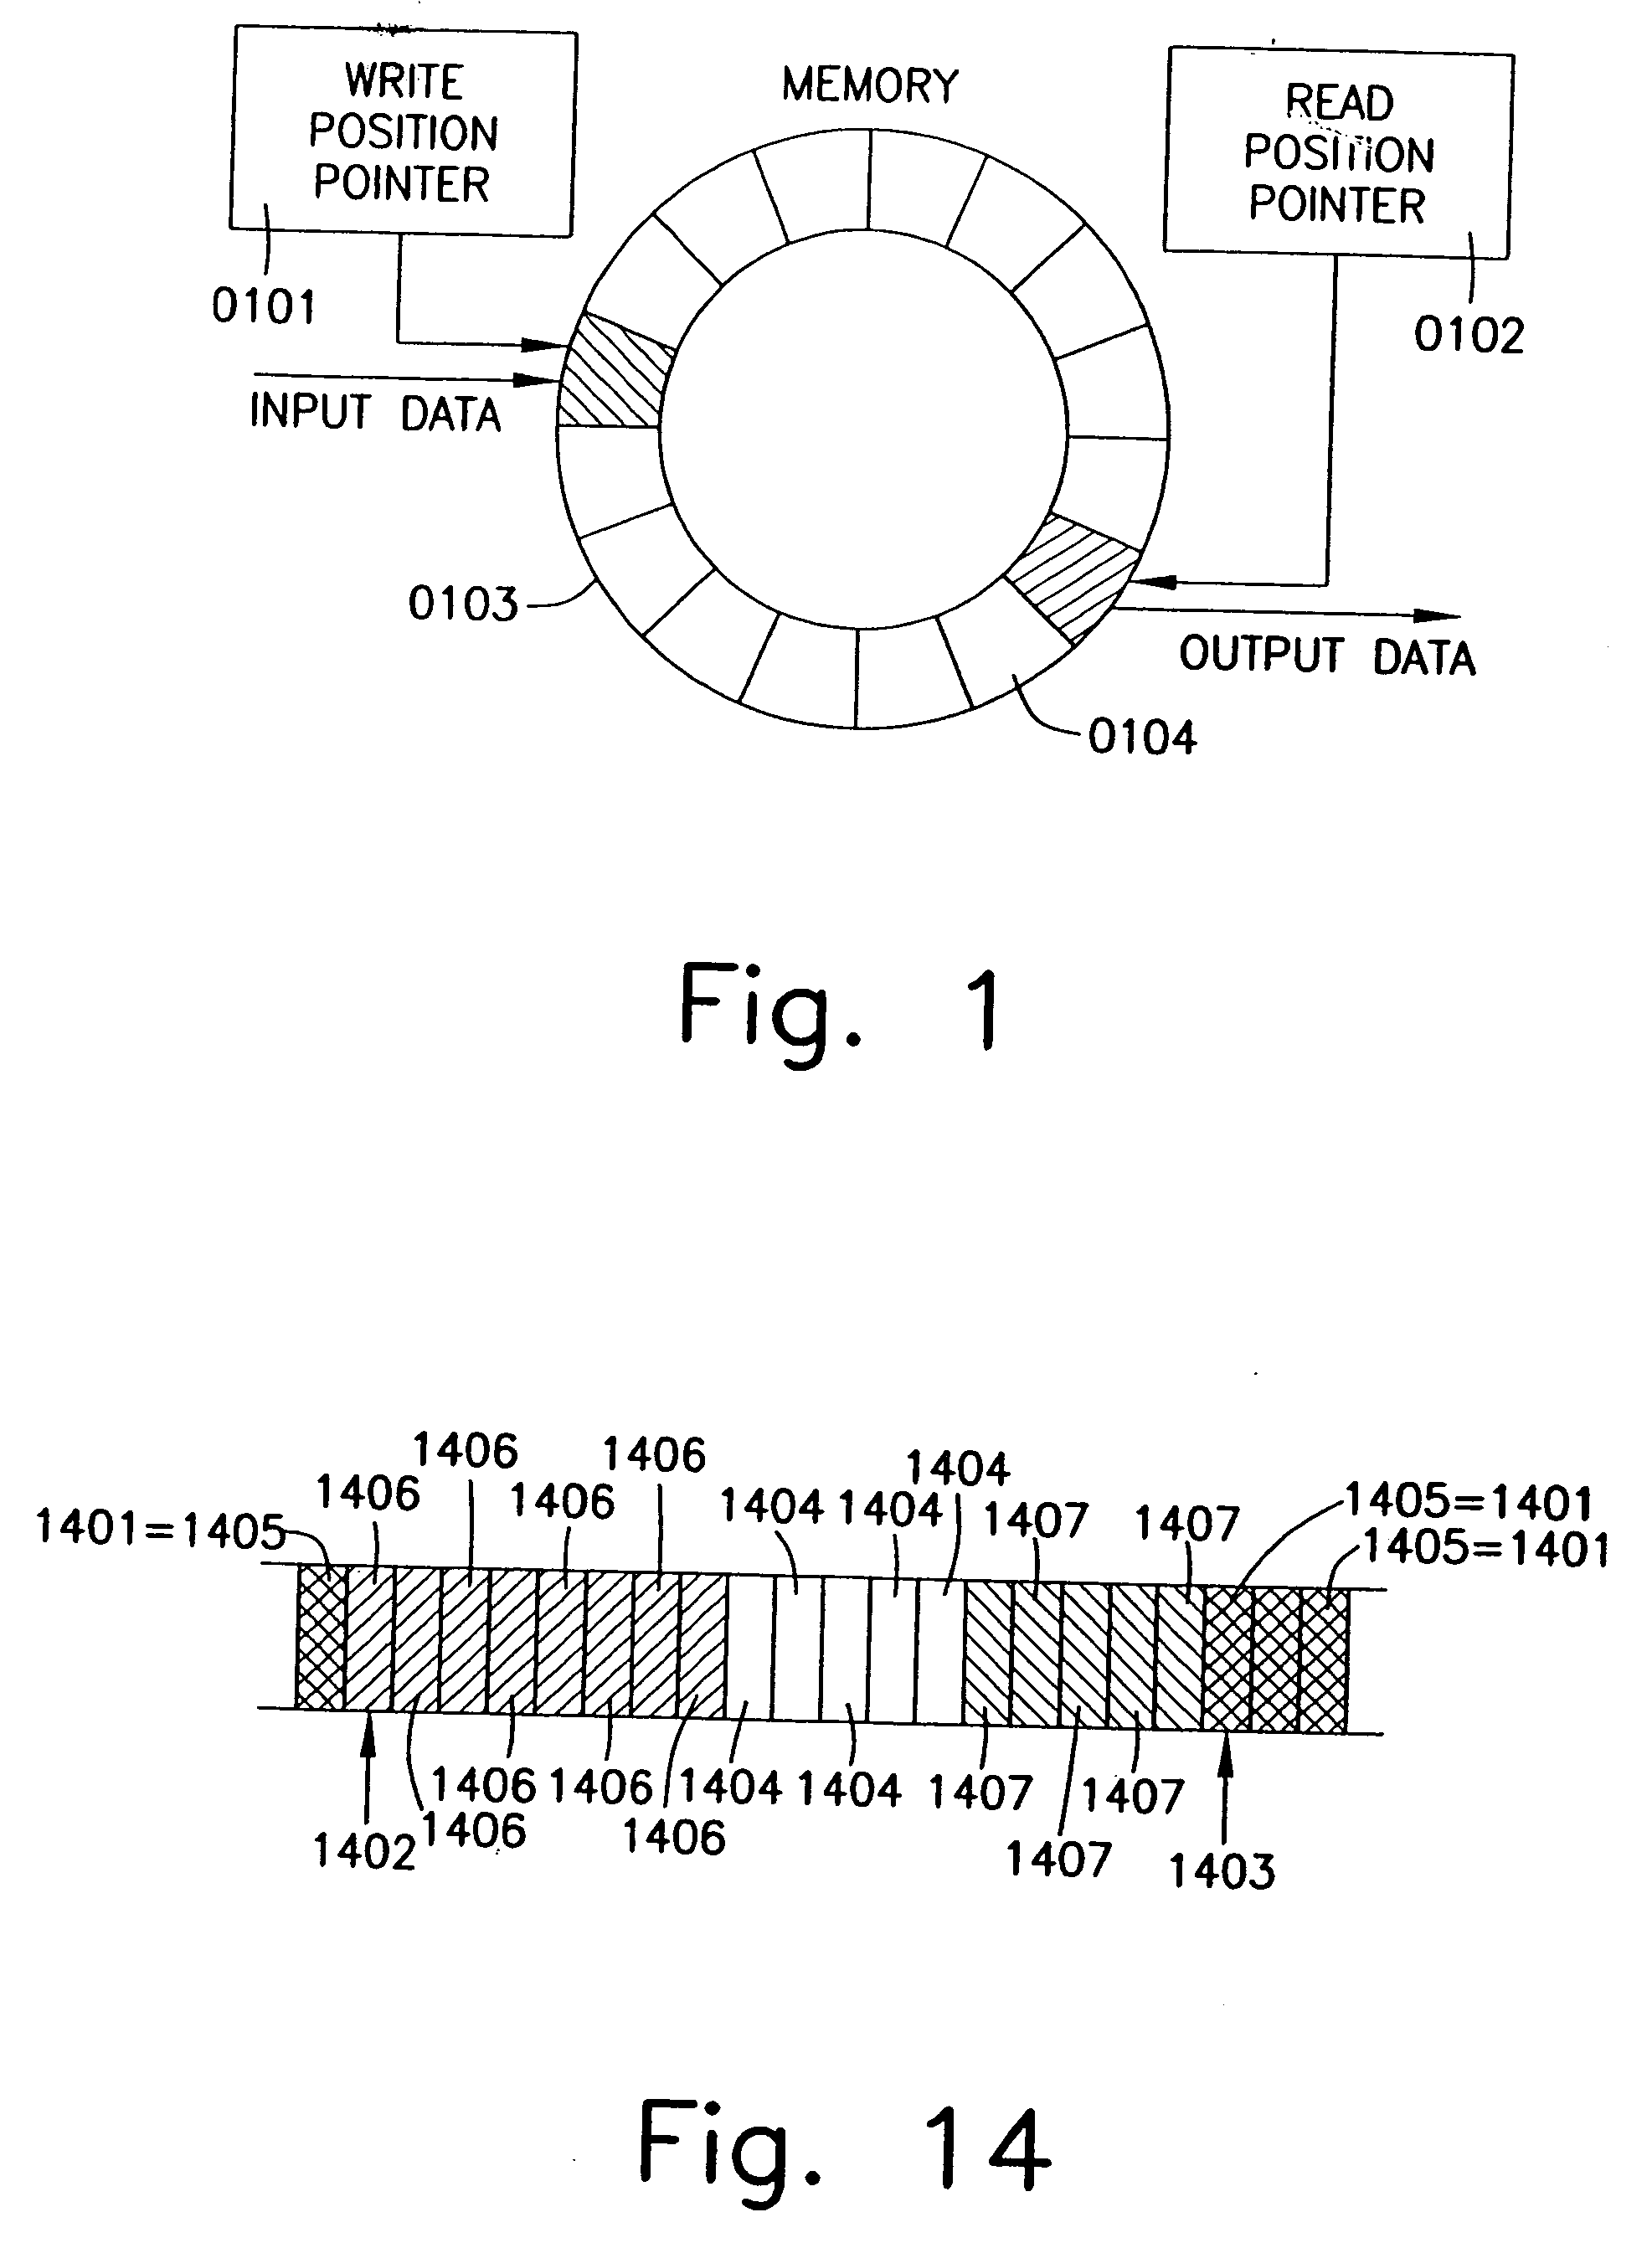 Process for automatic dynamic reloading of data flow processors (DFPs) and units with two- or three-dimensional programmable cell architectures (FPGAs, DPGAs, and the like